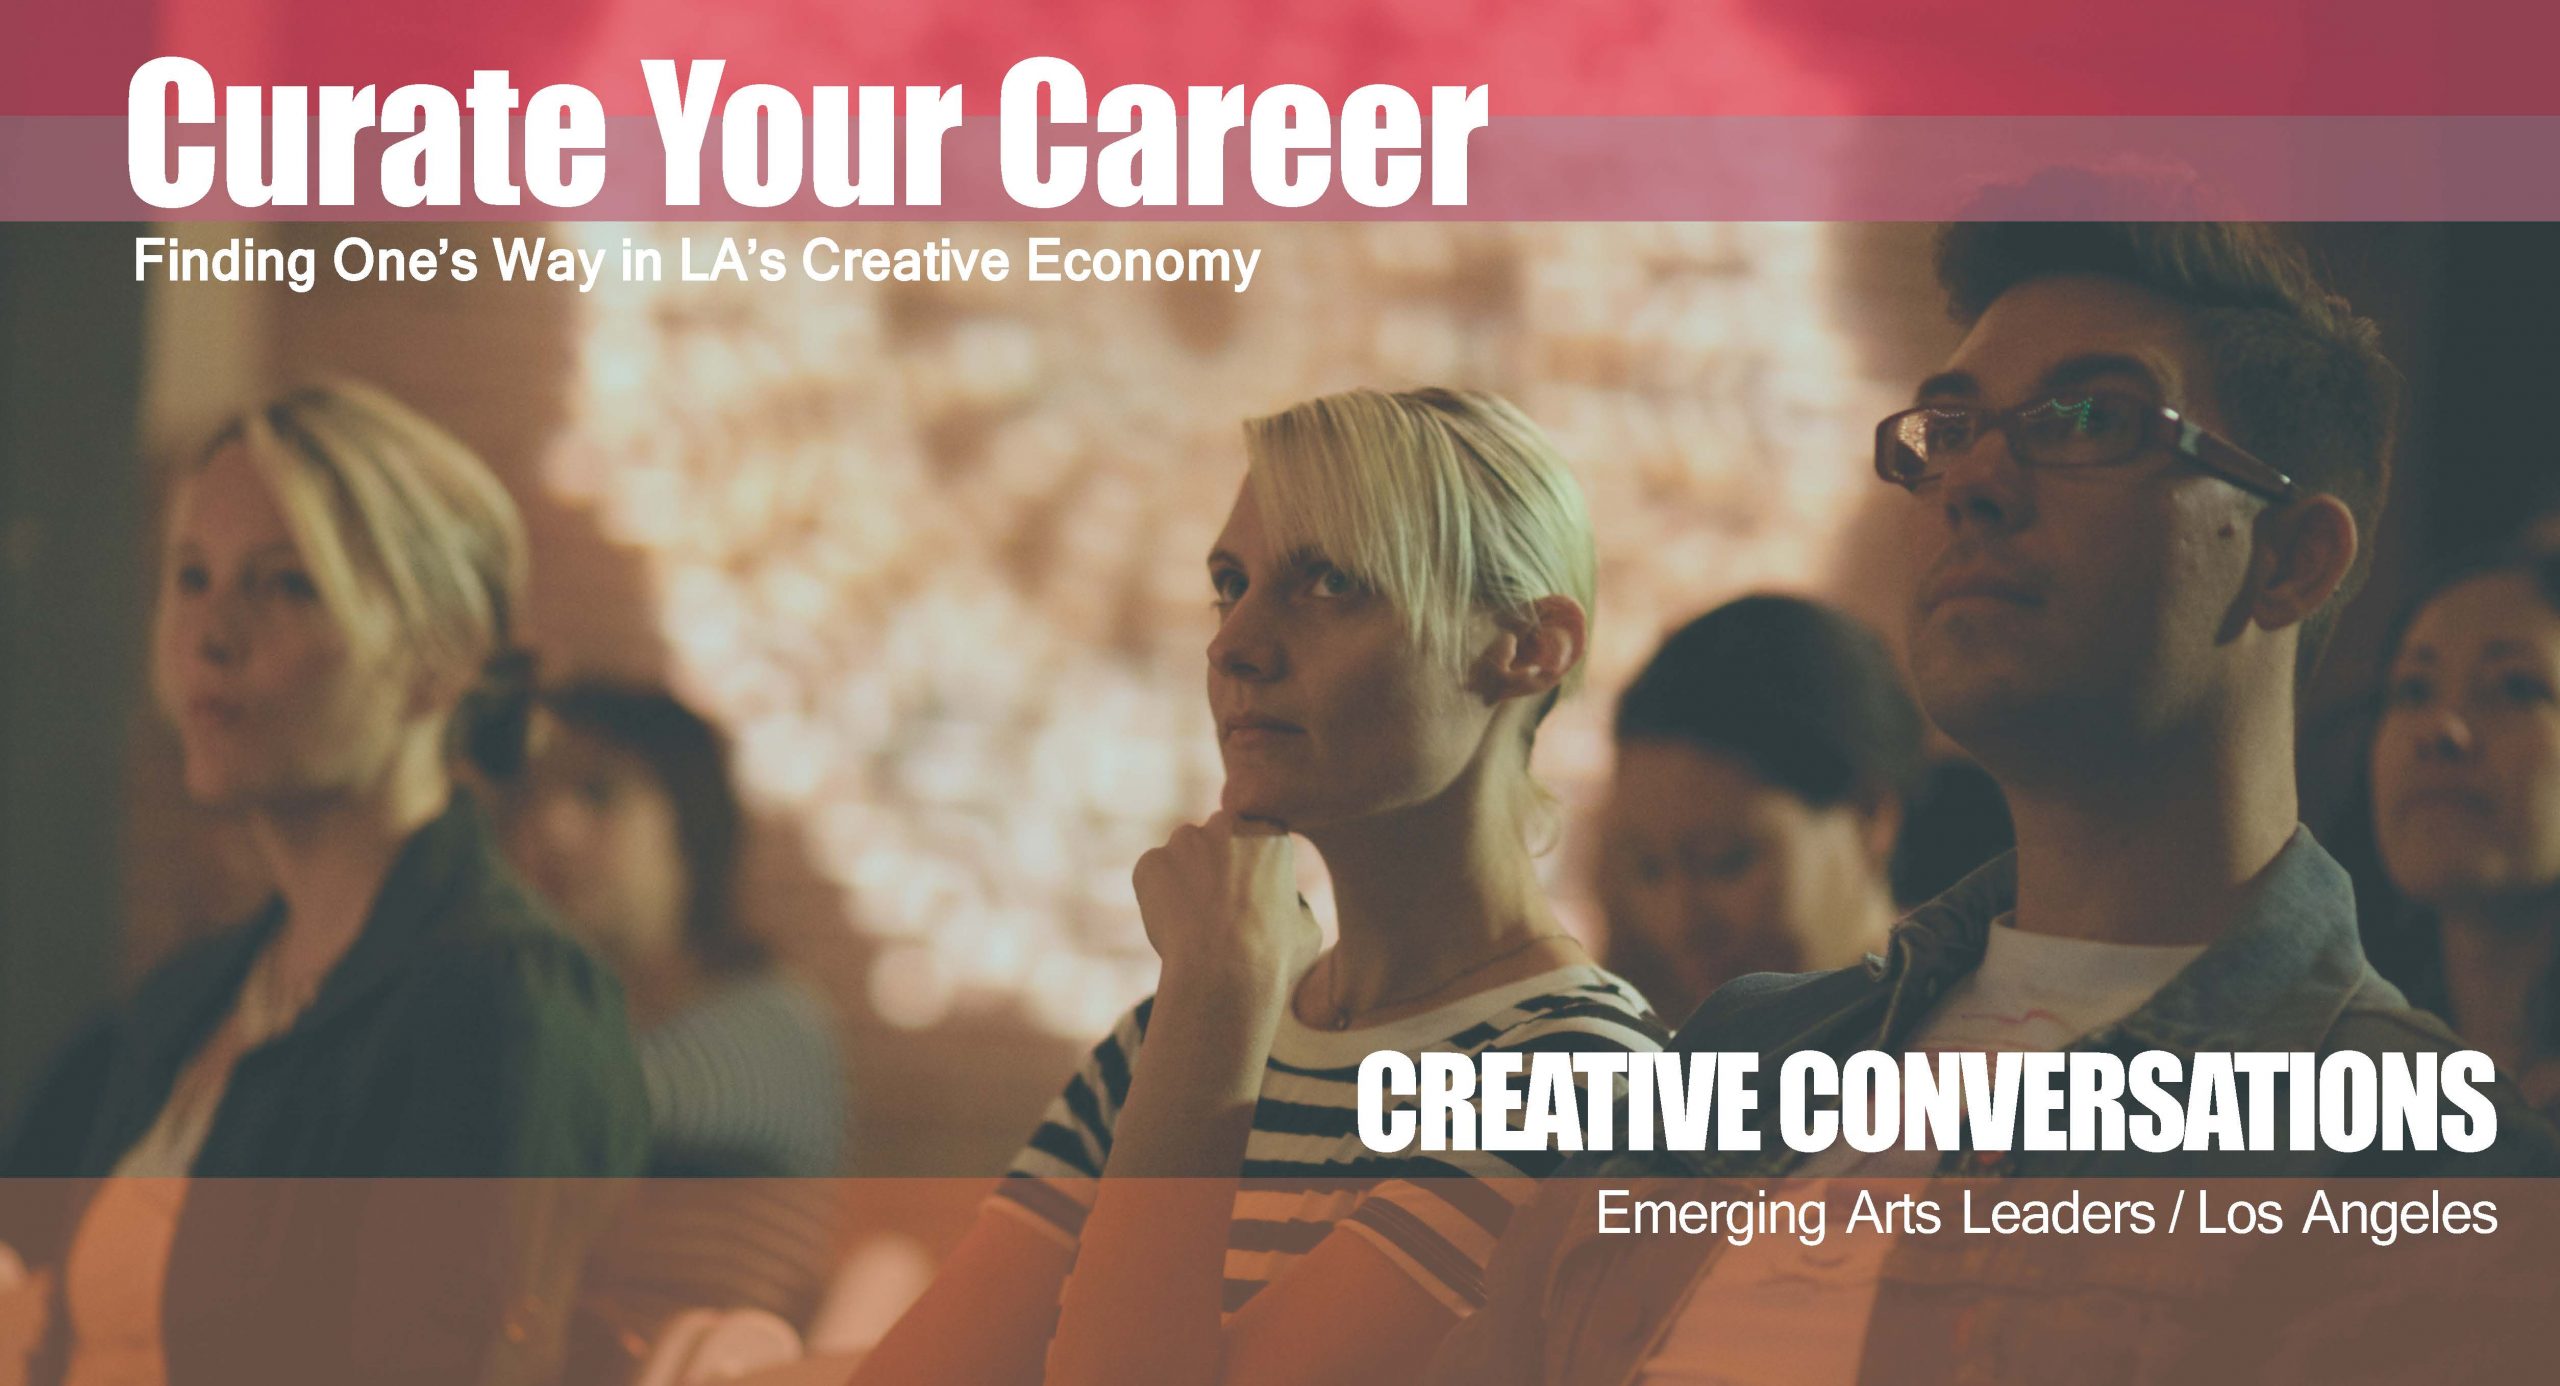 Curate Your Career: Finding One's Way in LA's Creative Economy